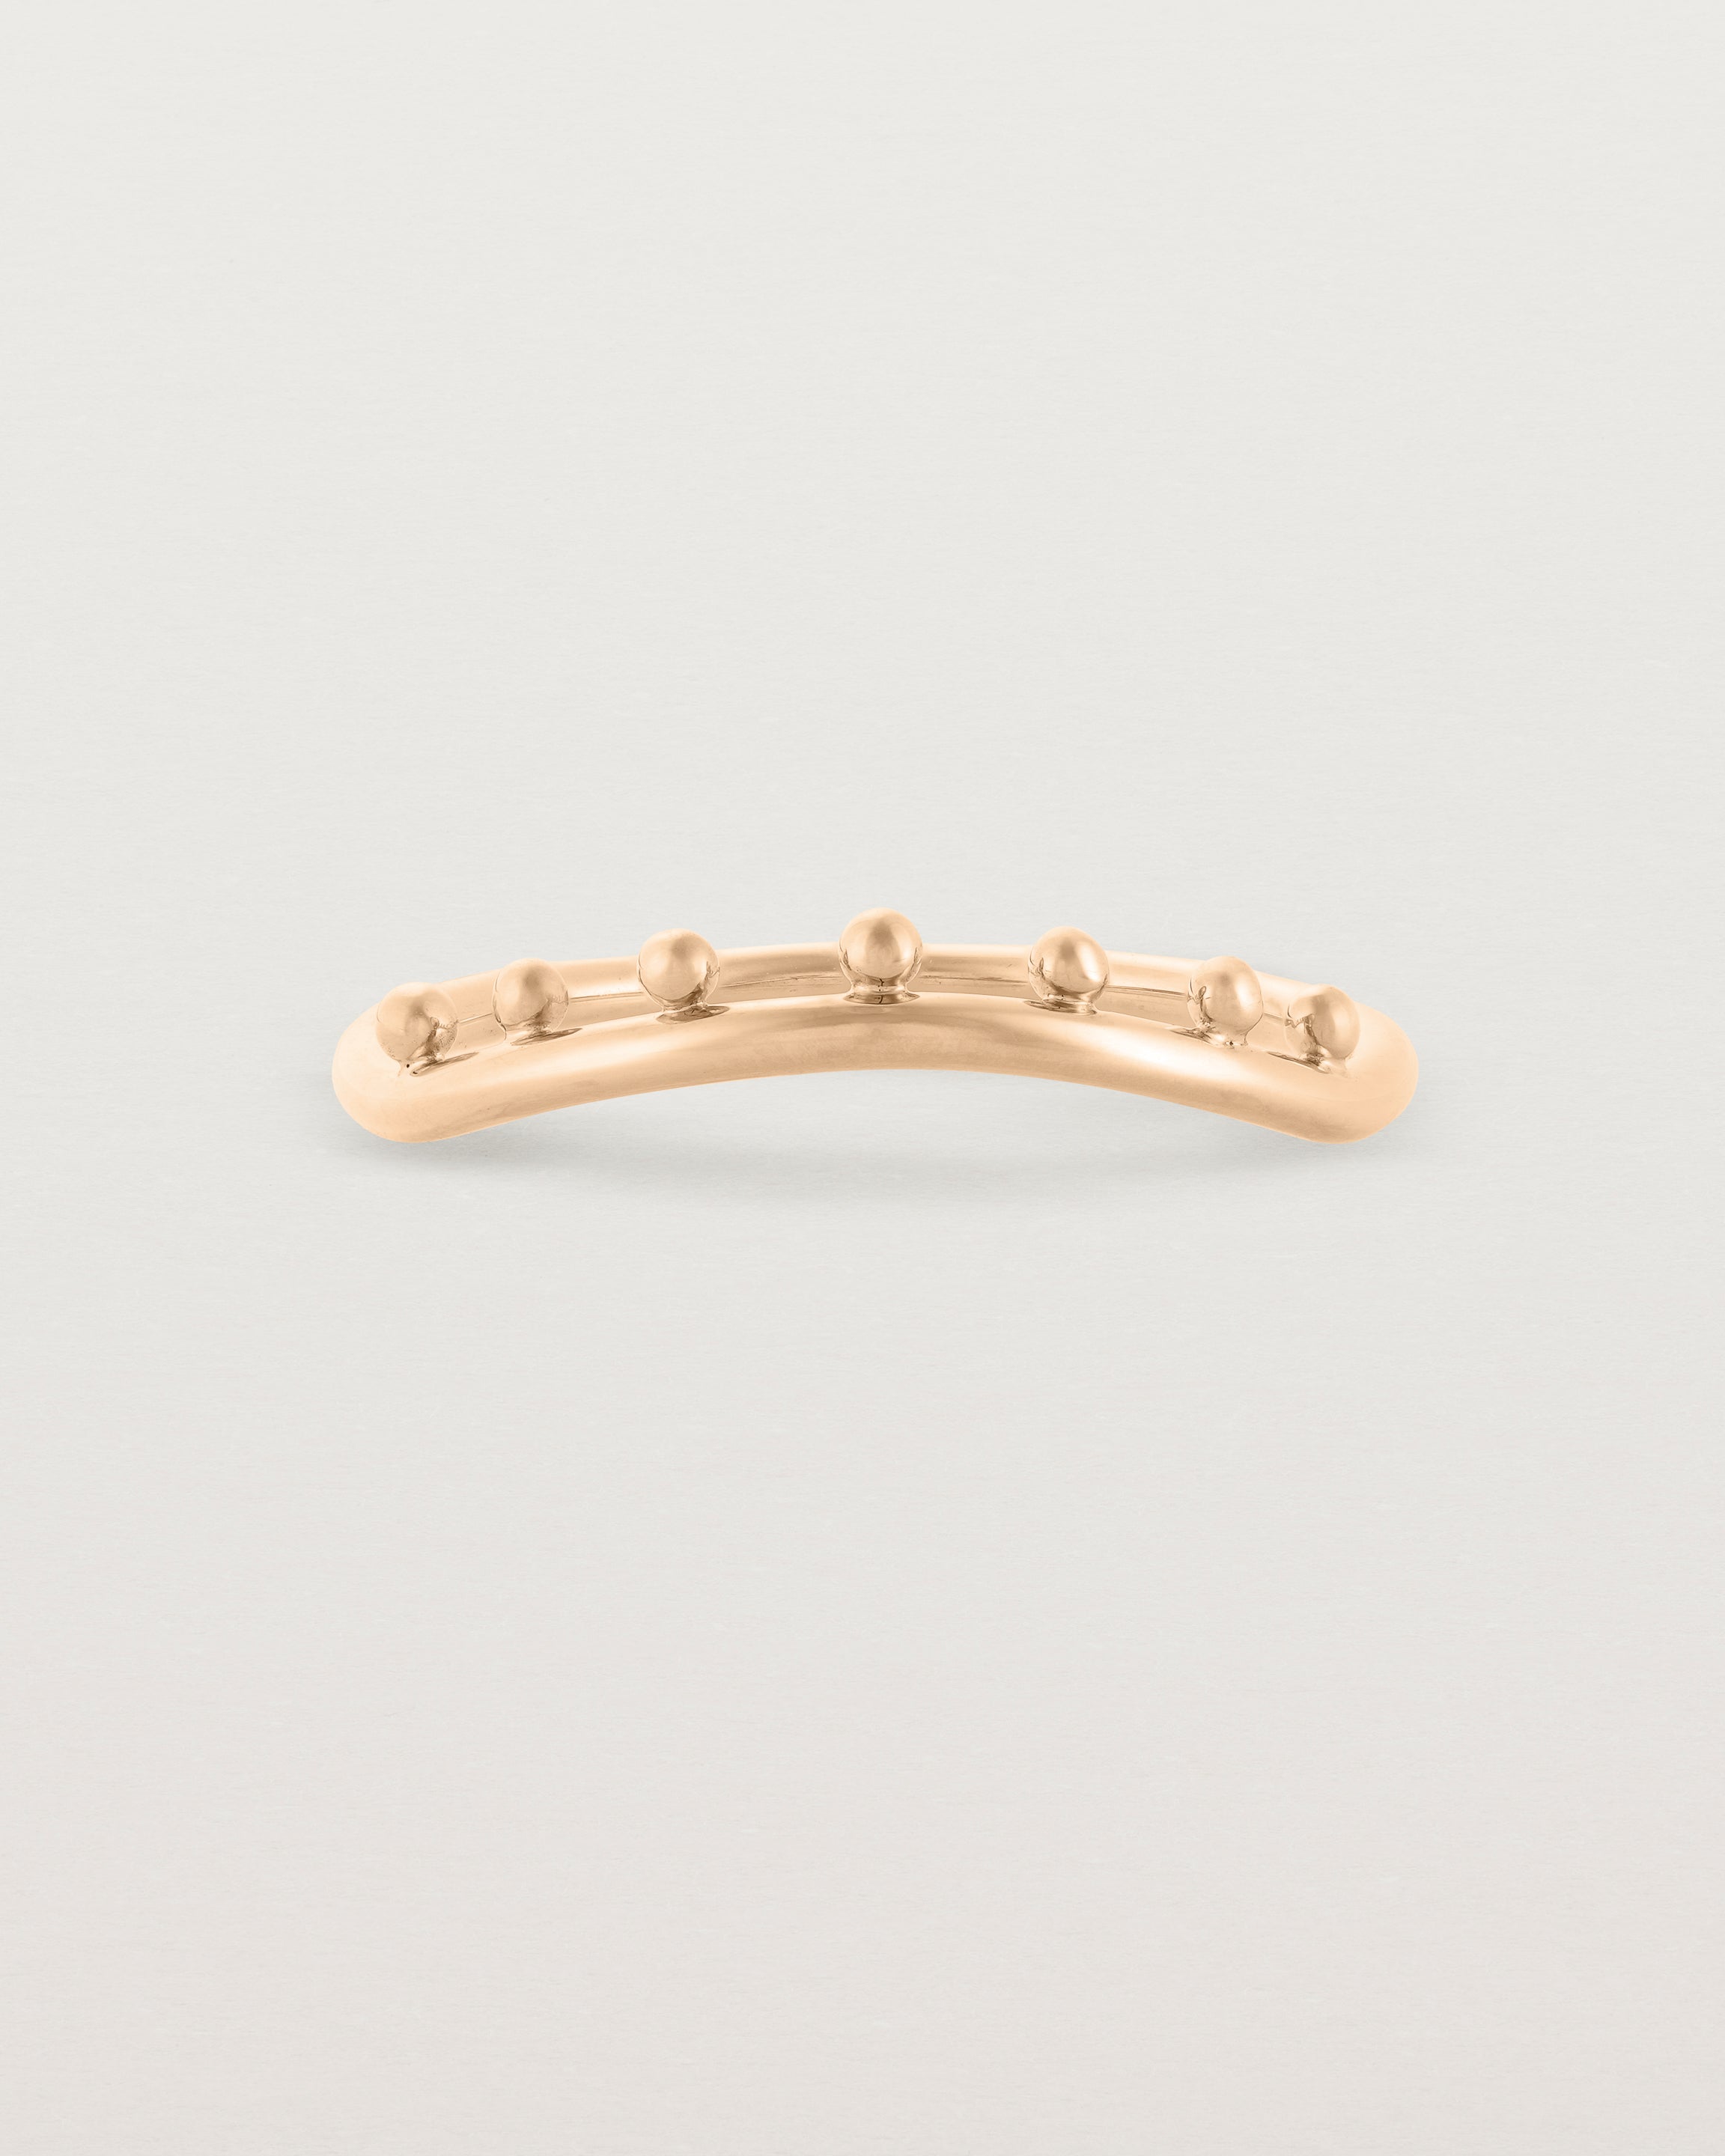 A gentle arc ring featuring dot detailing along the top of the arc, crafted in rose gold.